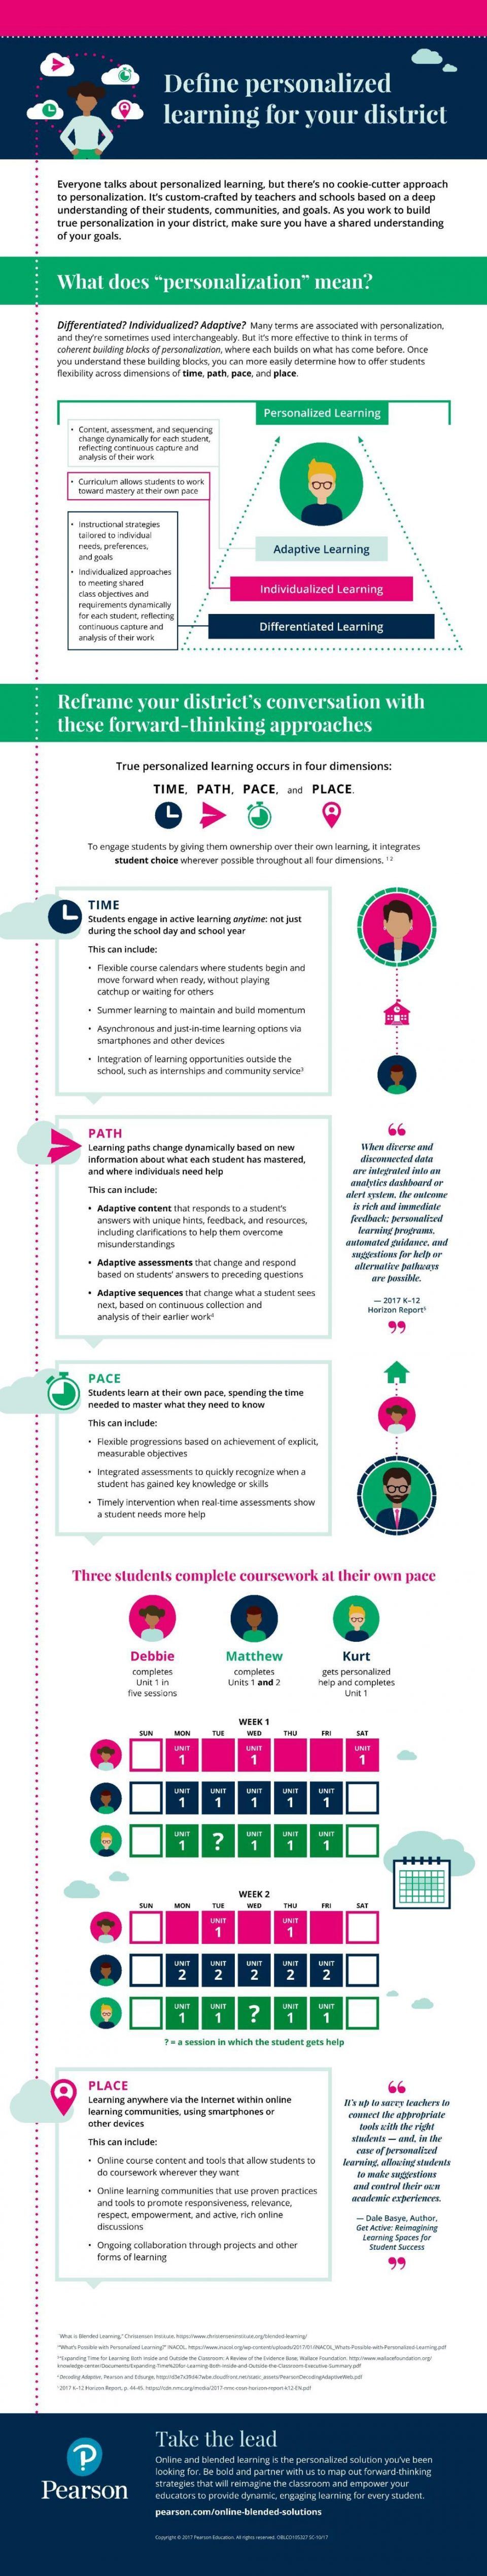 Defining Personalized Learning for Your District Infographic